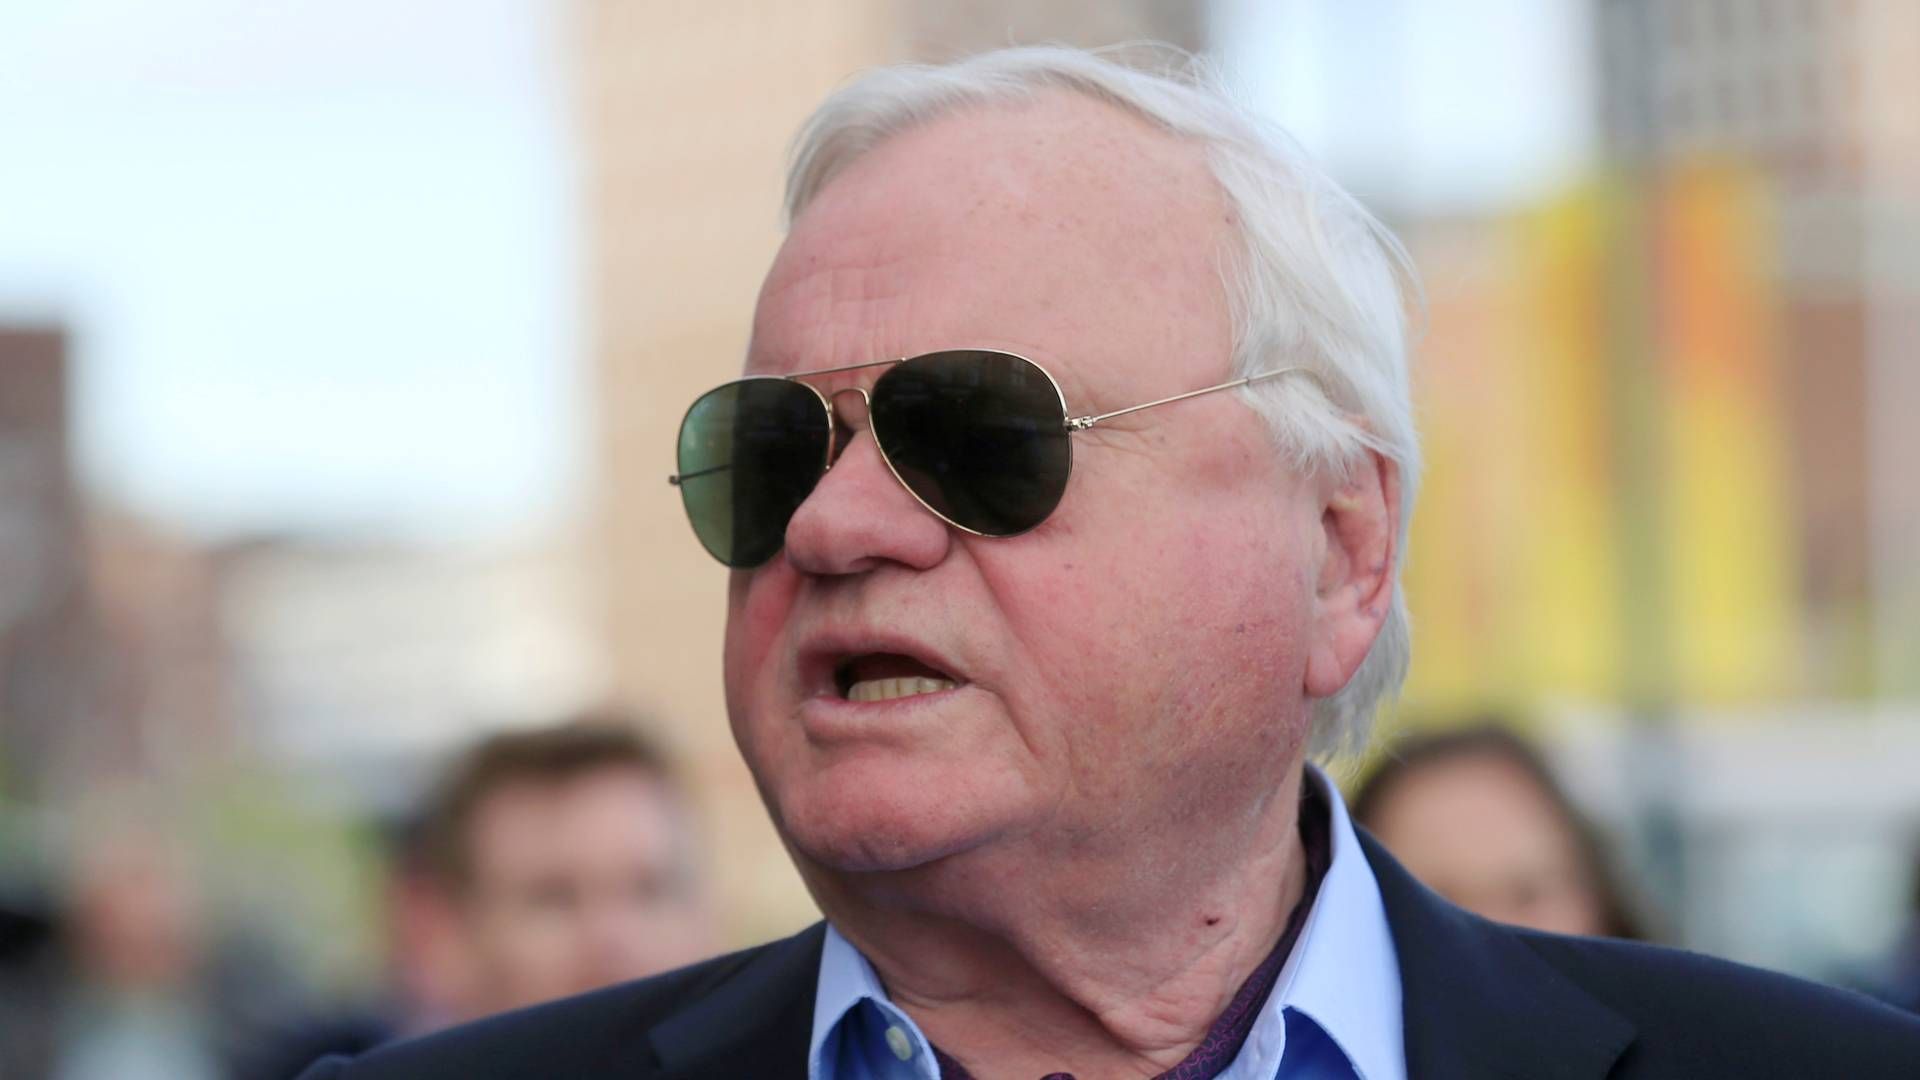 Norwegian-Cypriot shipping magnate John Fredriksen, whose tanker company Frontline stands to win big in a strong oil market. | Photo: Ints Kalnins/Reuters/Ritzau Scanpix